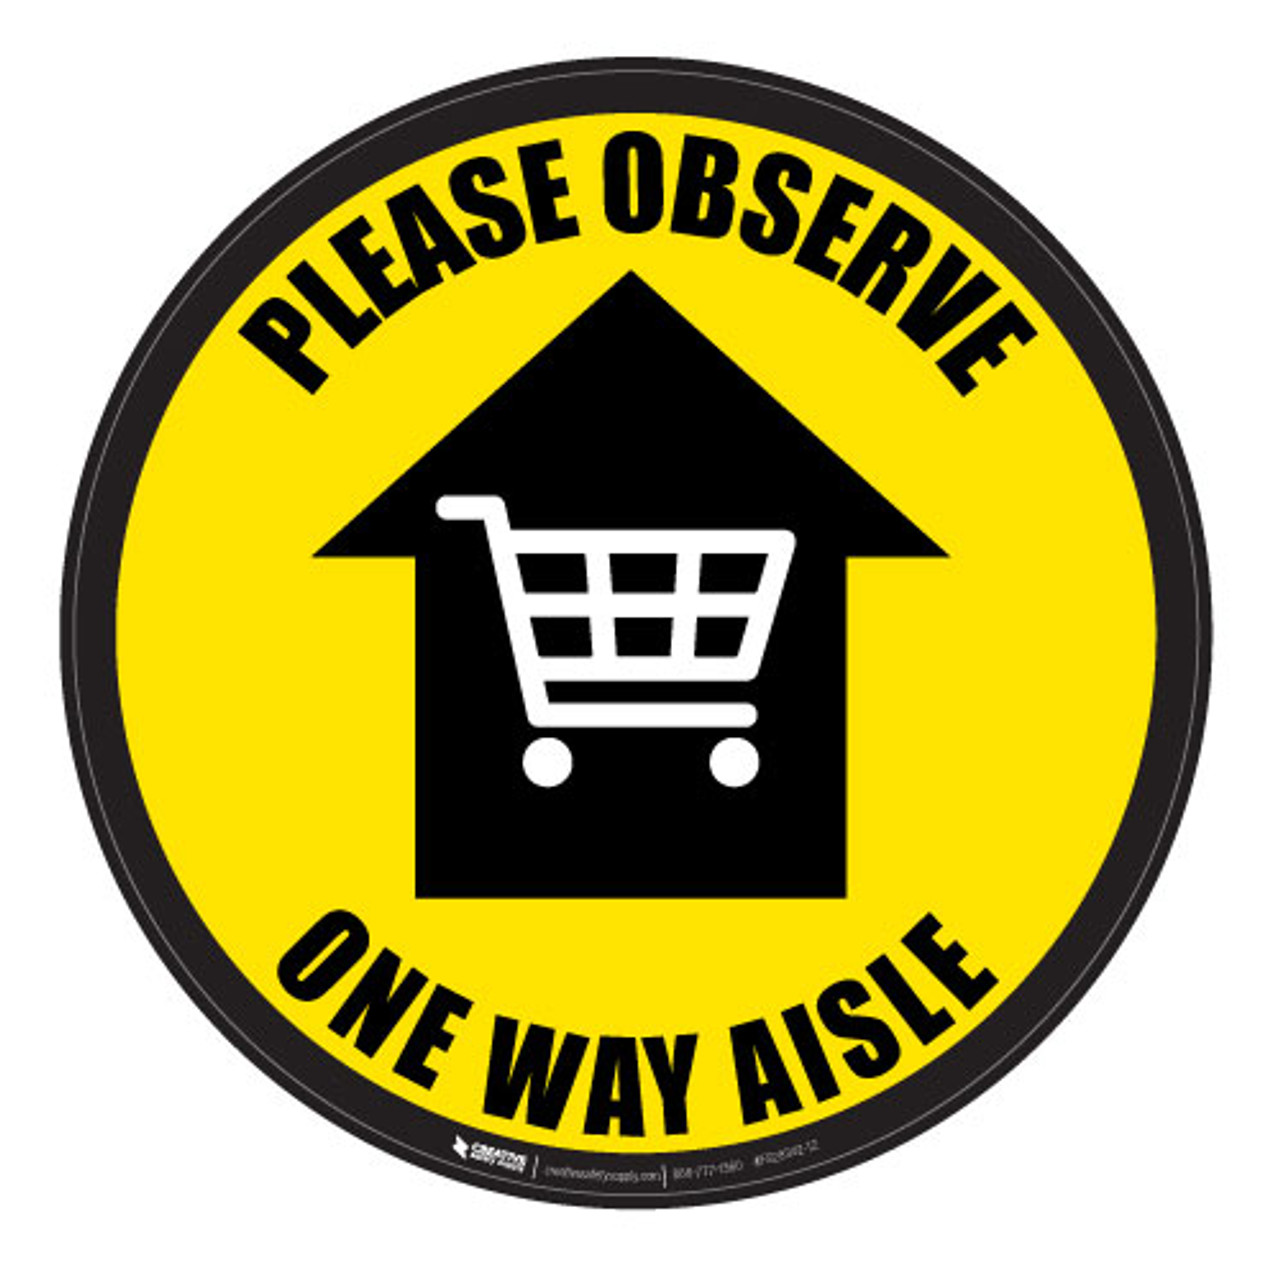 Please Observe One Way Aisle Yellow Floor Sign